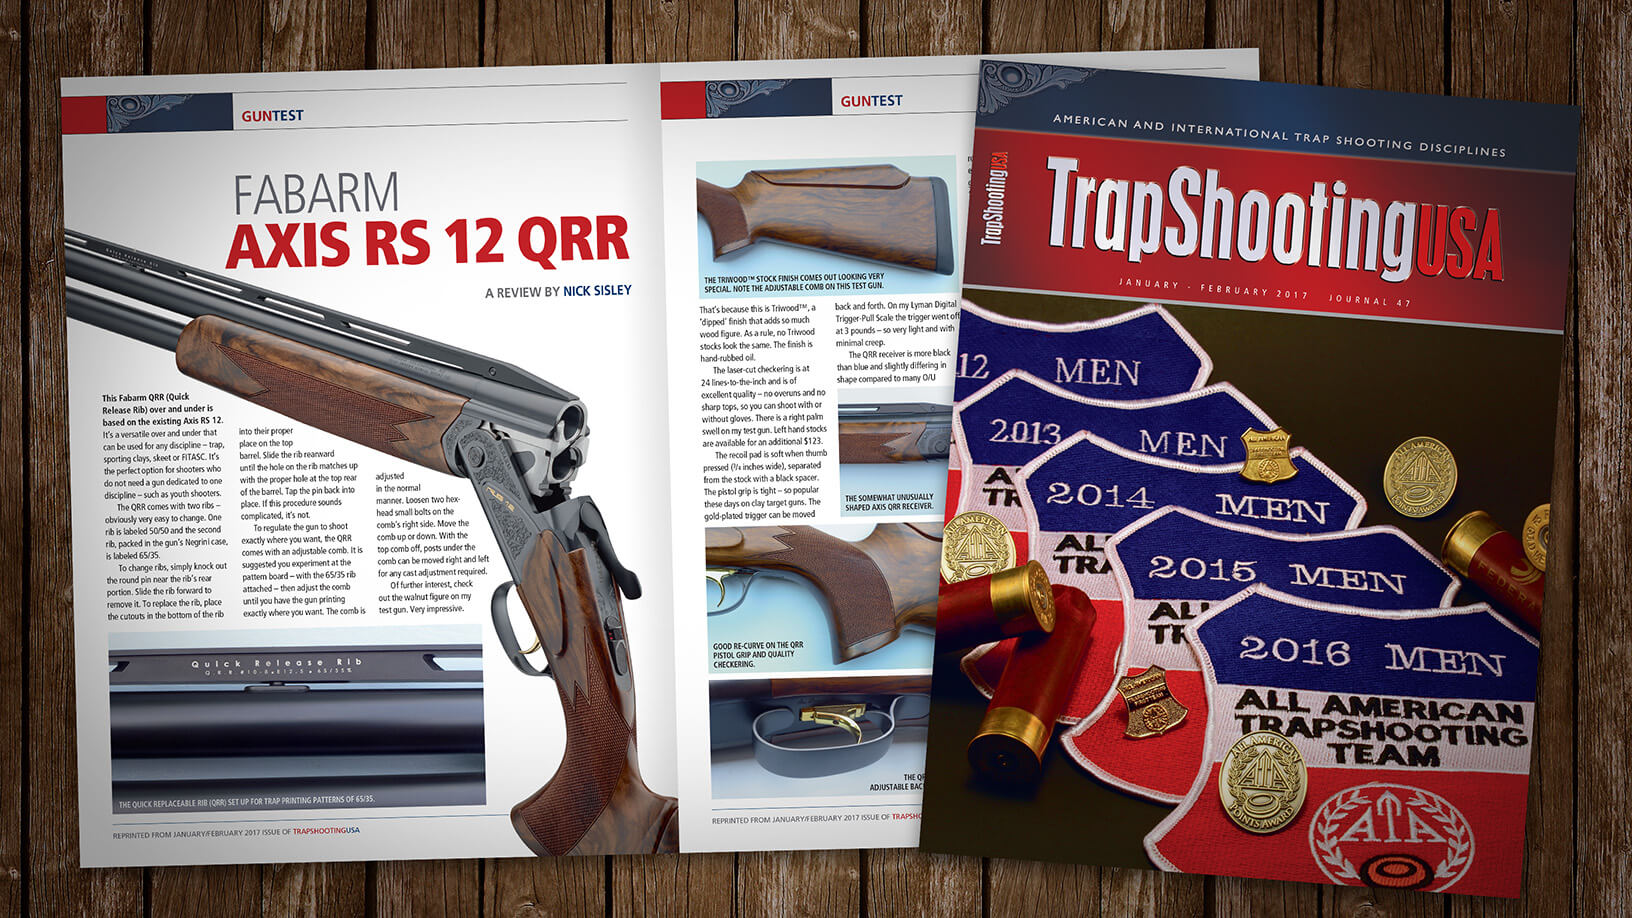 [TrapShooting USA: 01:17] Review: Fabarm Axis RS 12 QRR